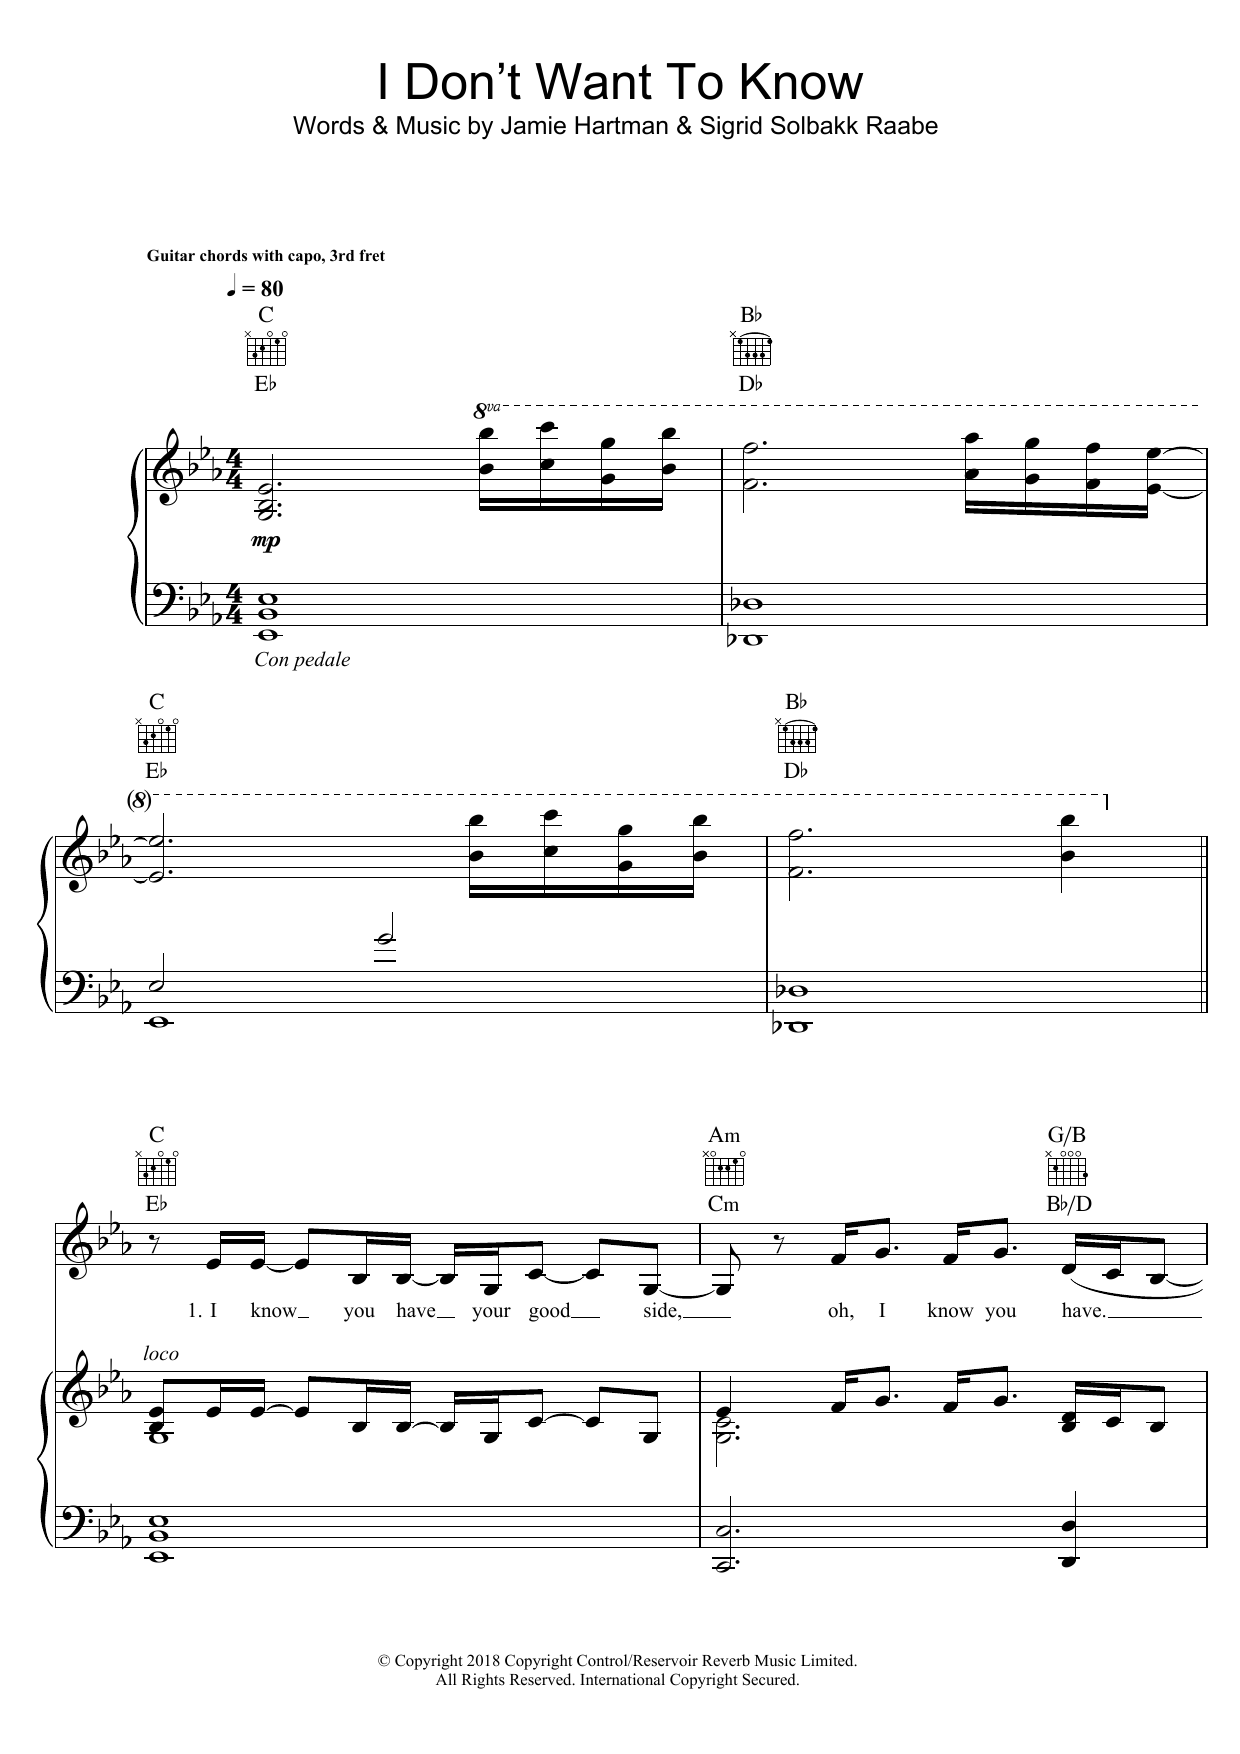 Download Sigrid I Don't Want To Know Sheet Music